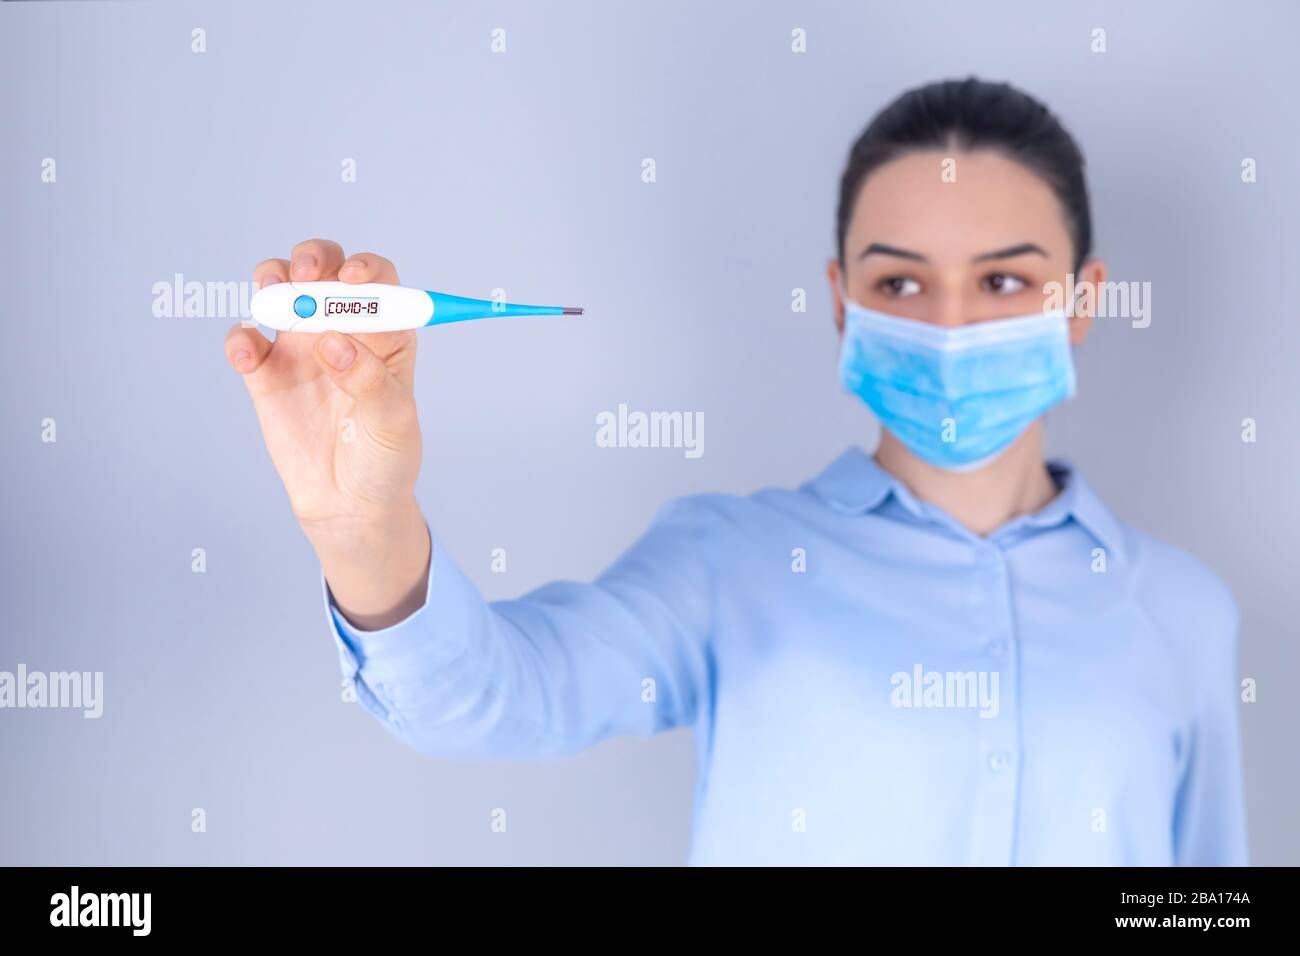 COVID-19 Pandemic Coronavirus Mask Fever Worry Girl Checking Temperature with Thermometer at Home Symptom of SARS-CoV-2. Girl with mask on face check Stock Photo